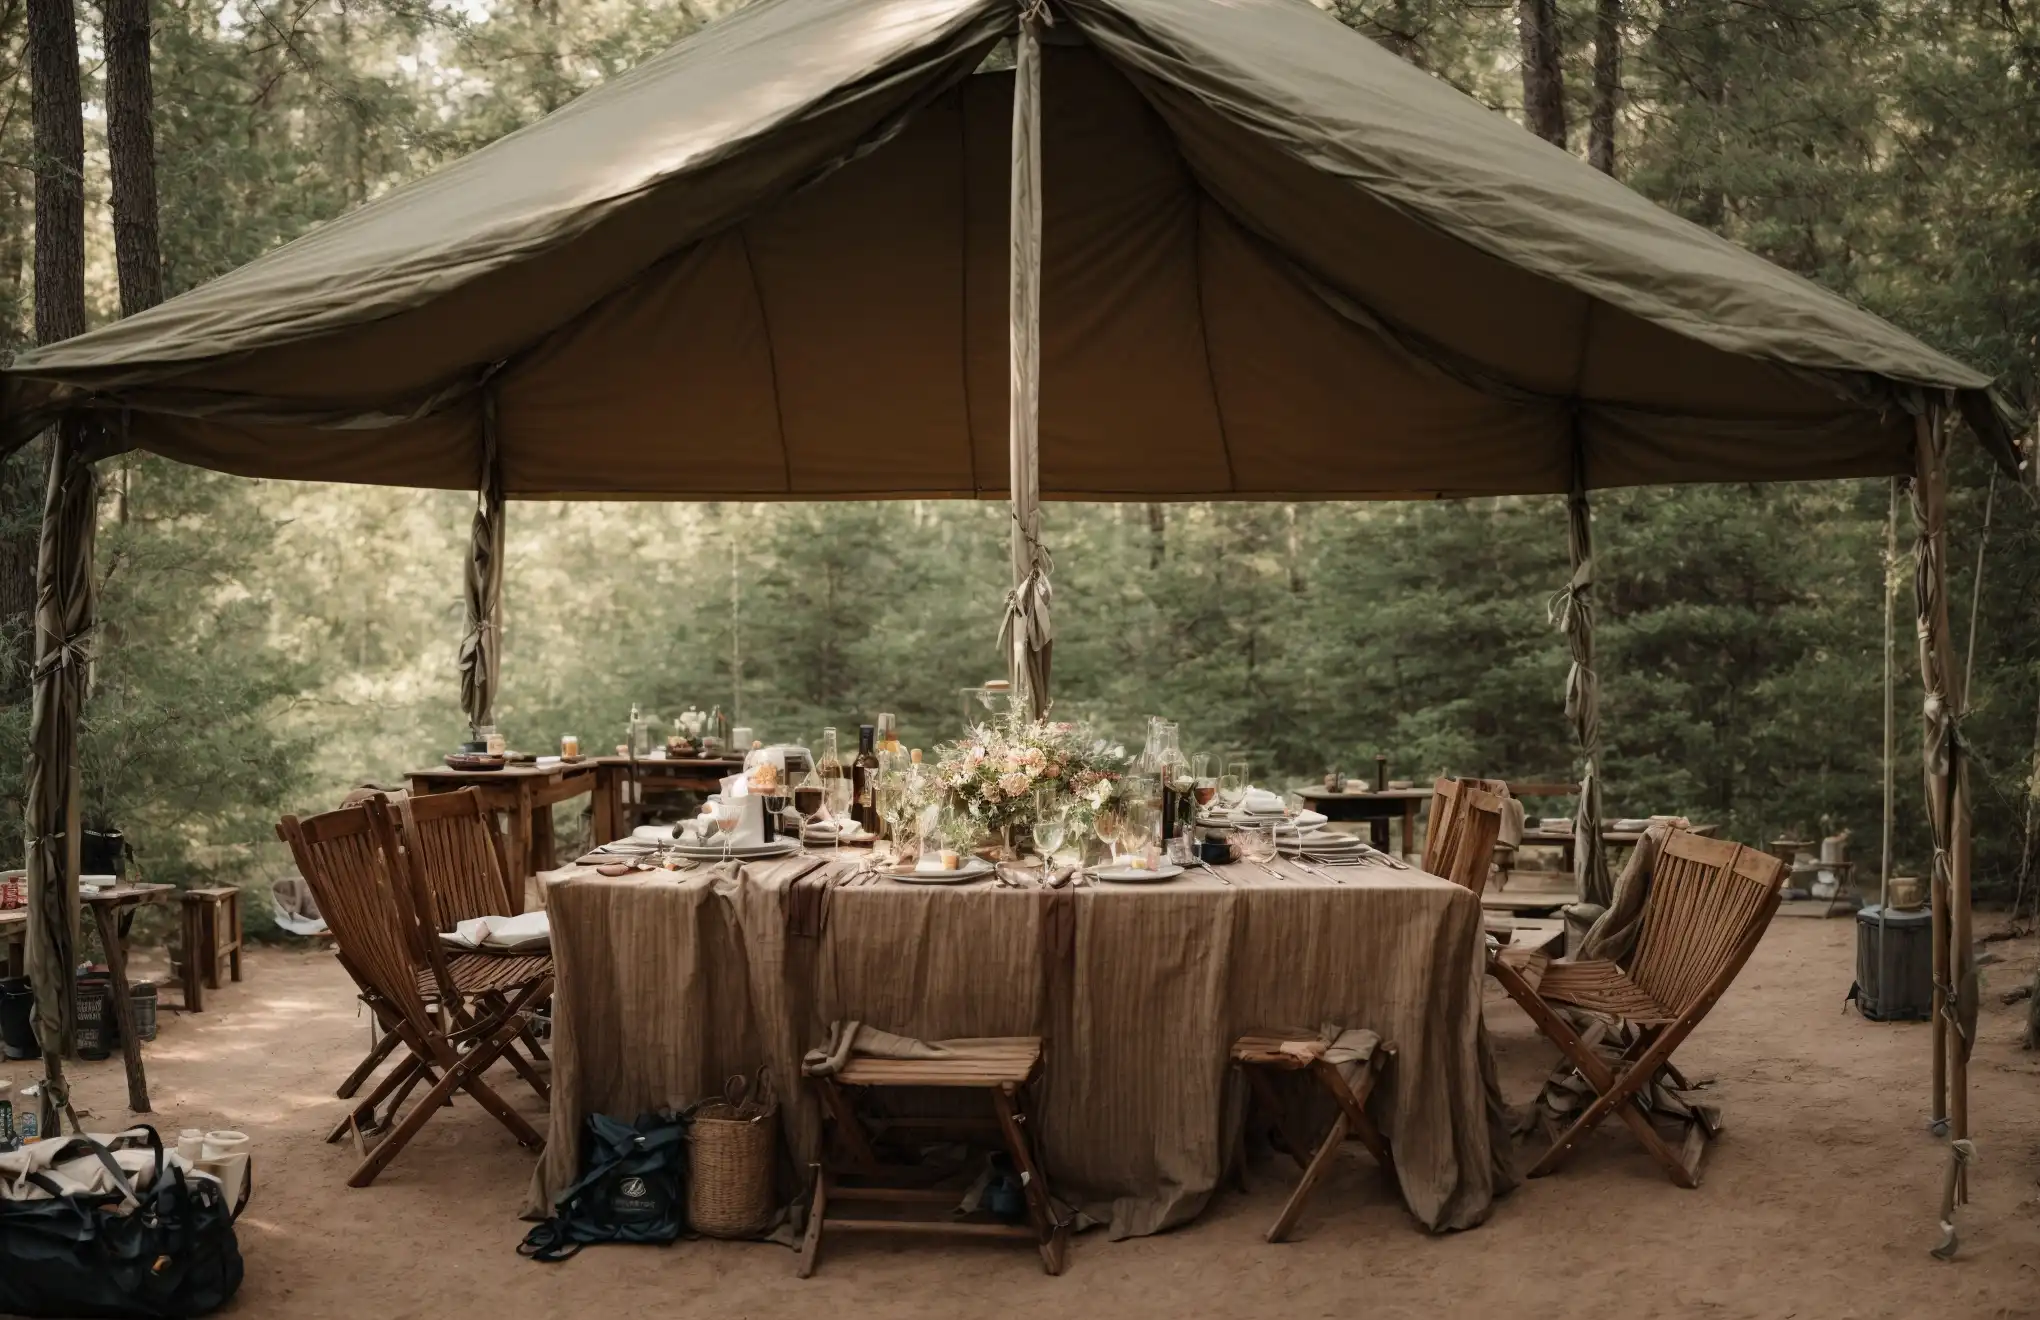 A single 6-foot table surrounded by comfortable chairs in the tent